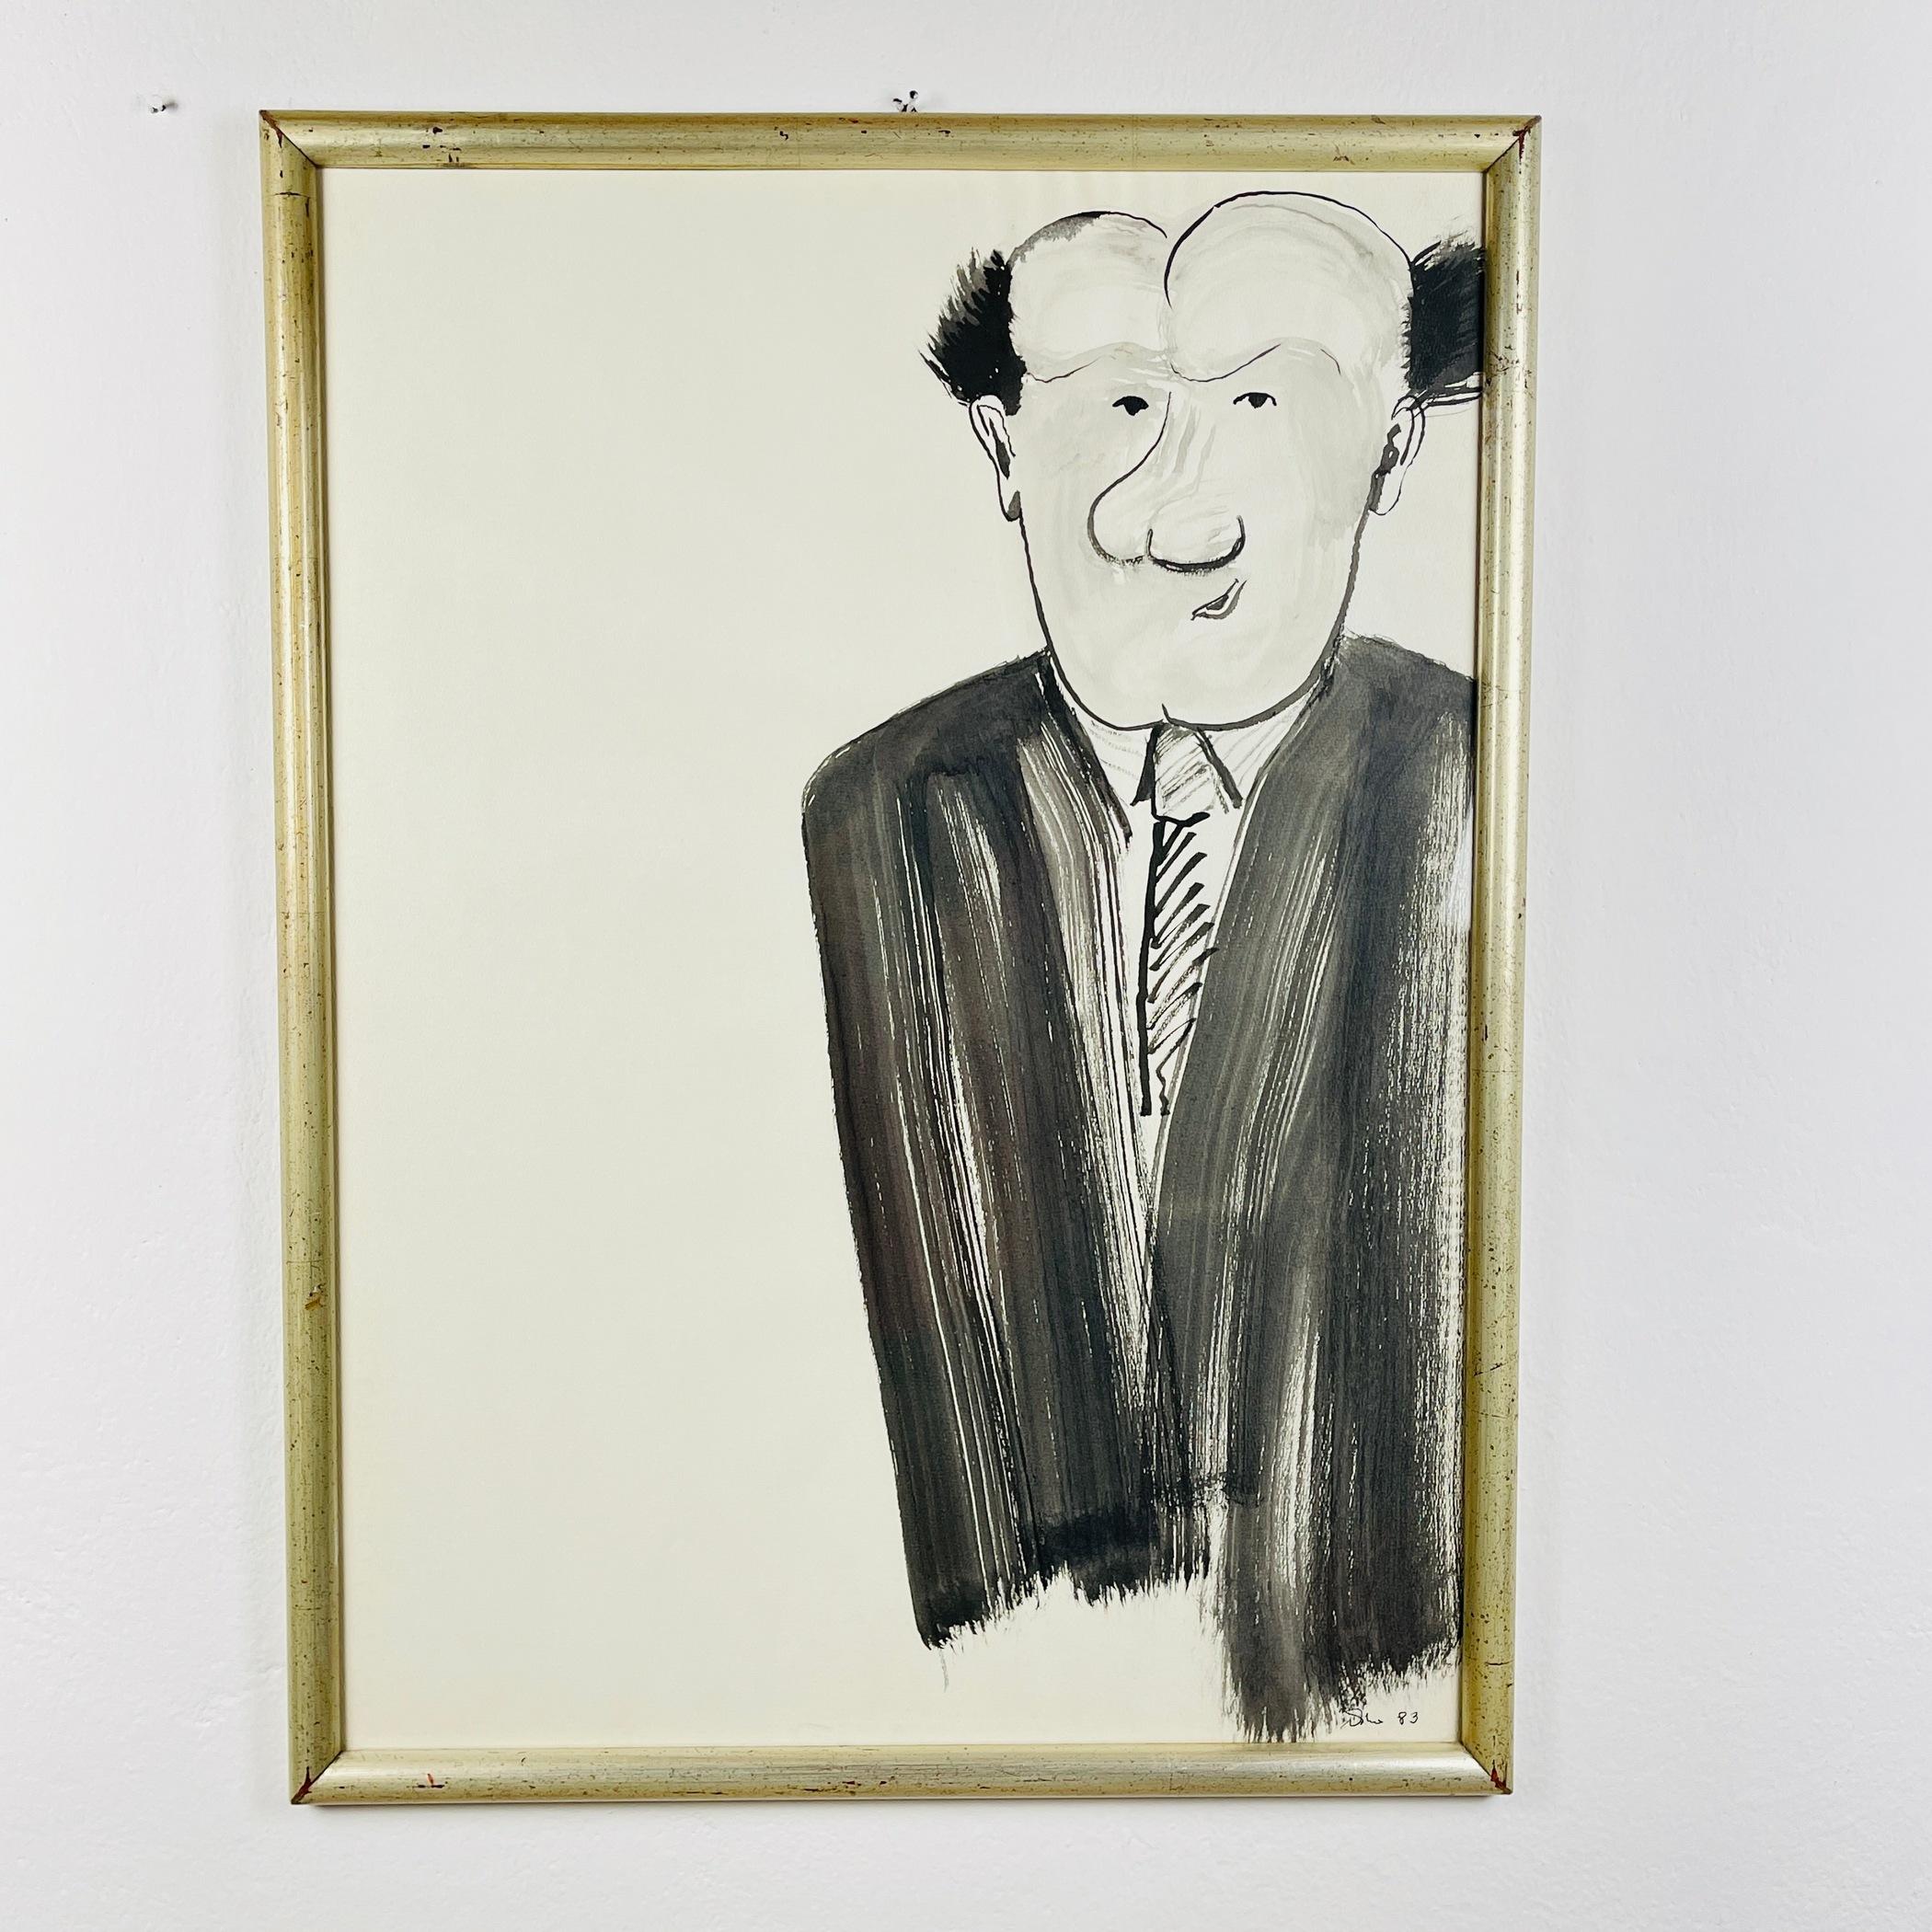 A caricature portrait of an unknown man, created in Trieste (Italy) in 1983 using black watercolor. Since the author is unknown, it adds an air of mystery to the piece. Caricatures are known for exaggerating certain features or characteristics of a